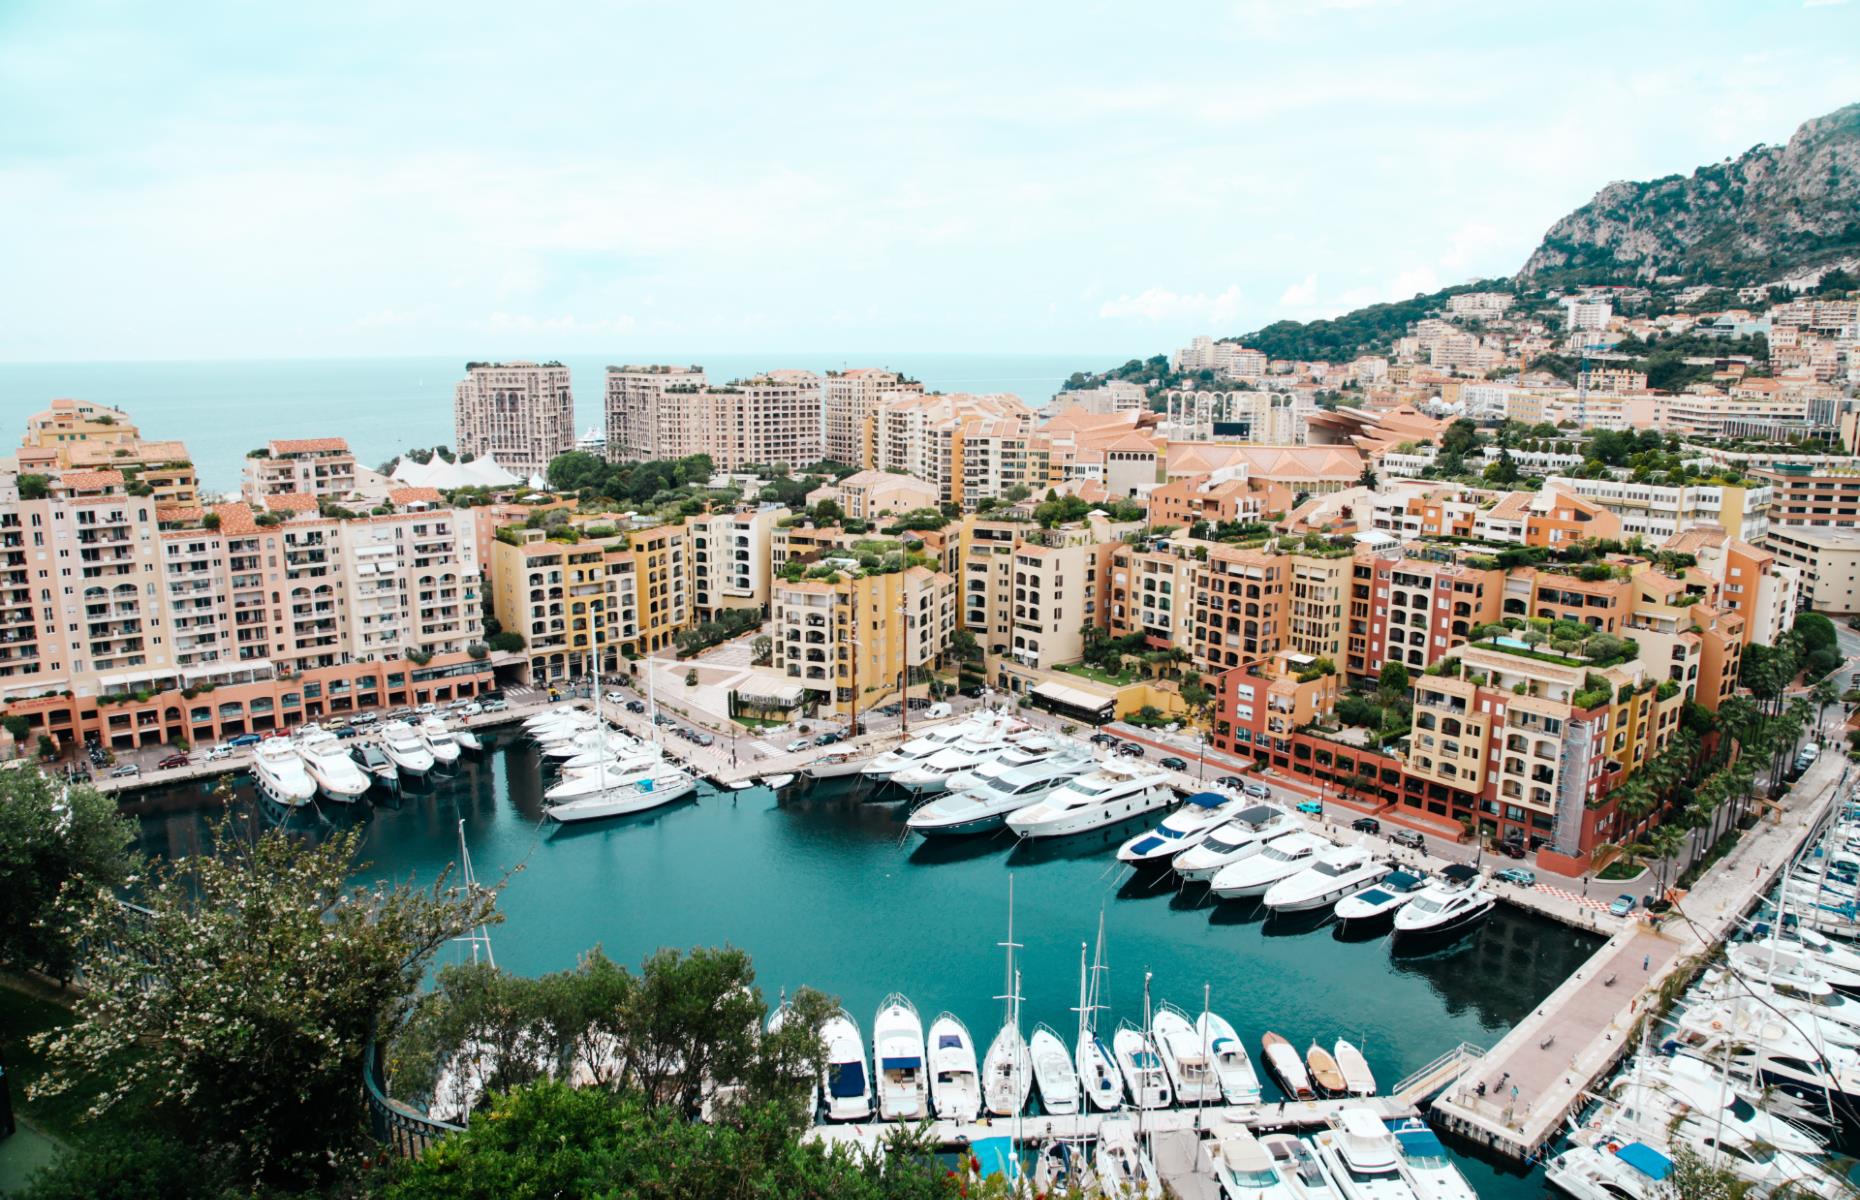 In the heart of glamorous Monaco, the small, enclosed Port de Fontvieille certainly provides its fair share of eye candy when it comes to luxury yachts. Set against Monaco’s striking rocky hills, the waterside is also home to a number of bars, hotels and restaurants in which to kick back and gaze out at the view.